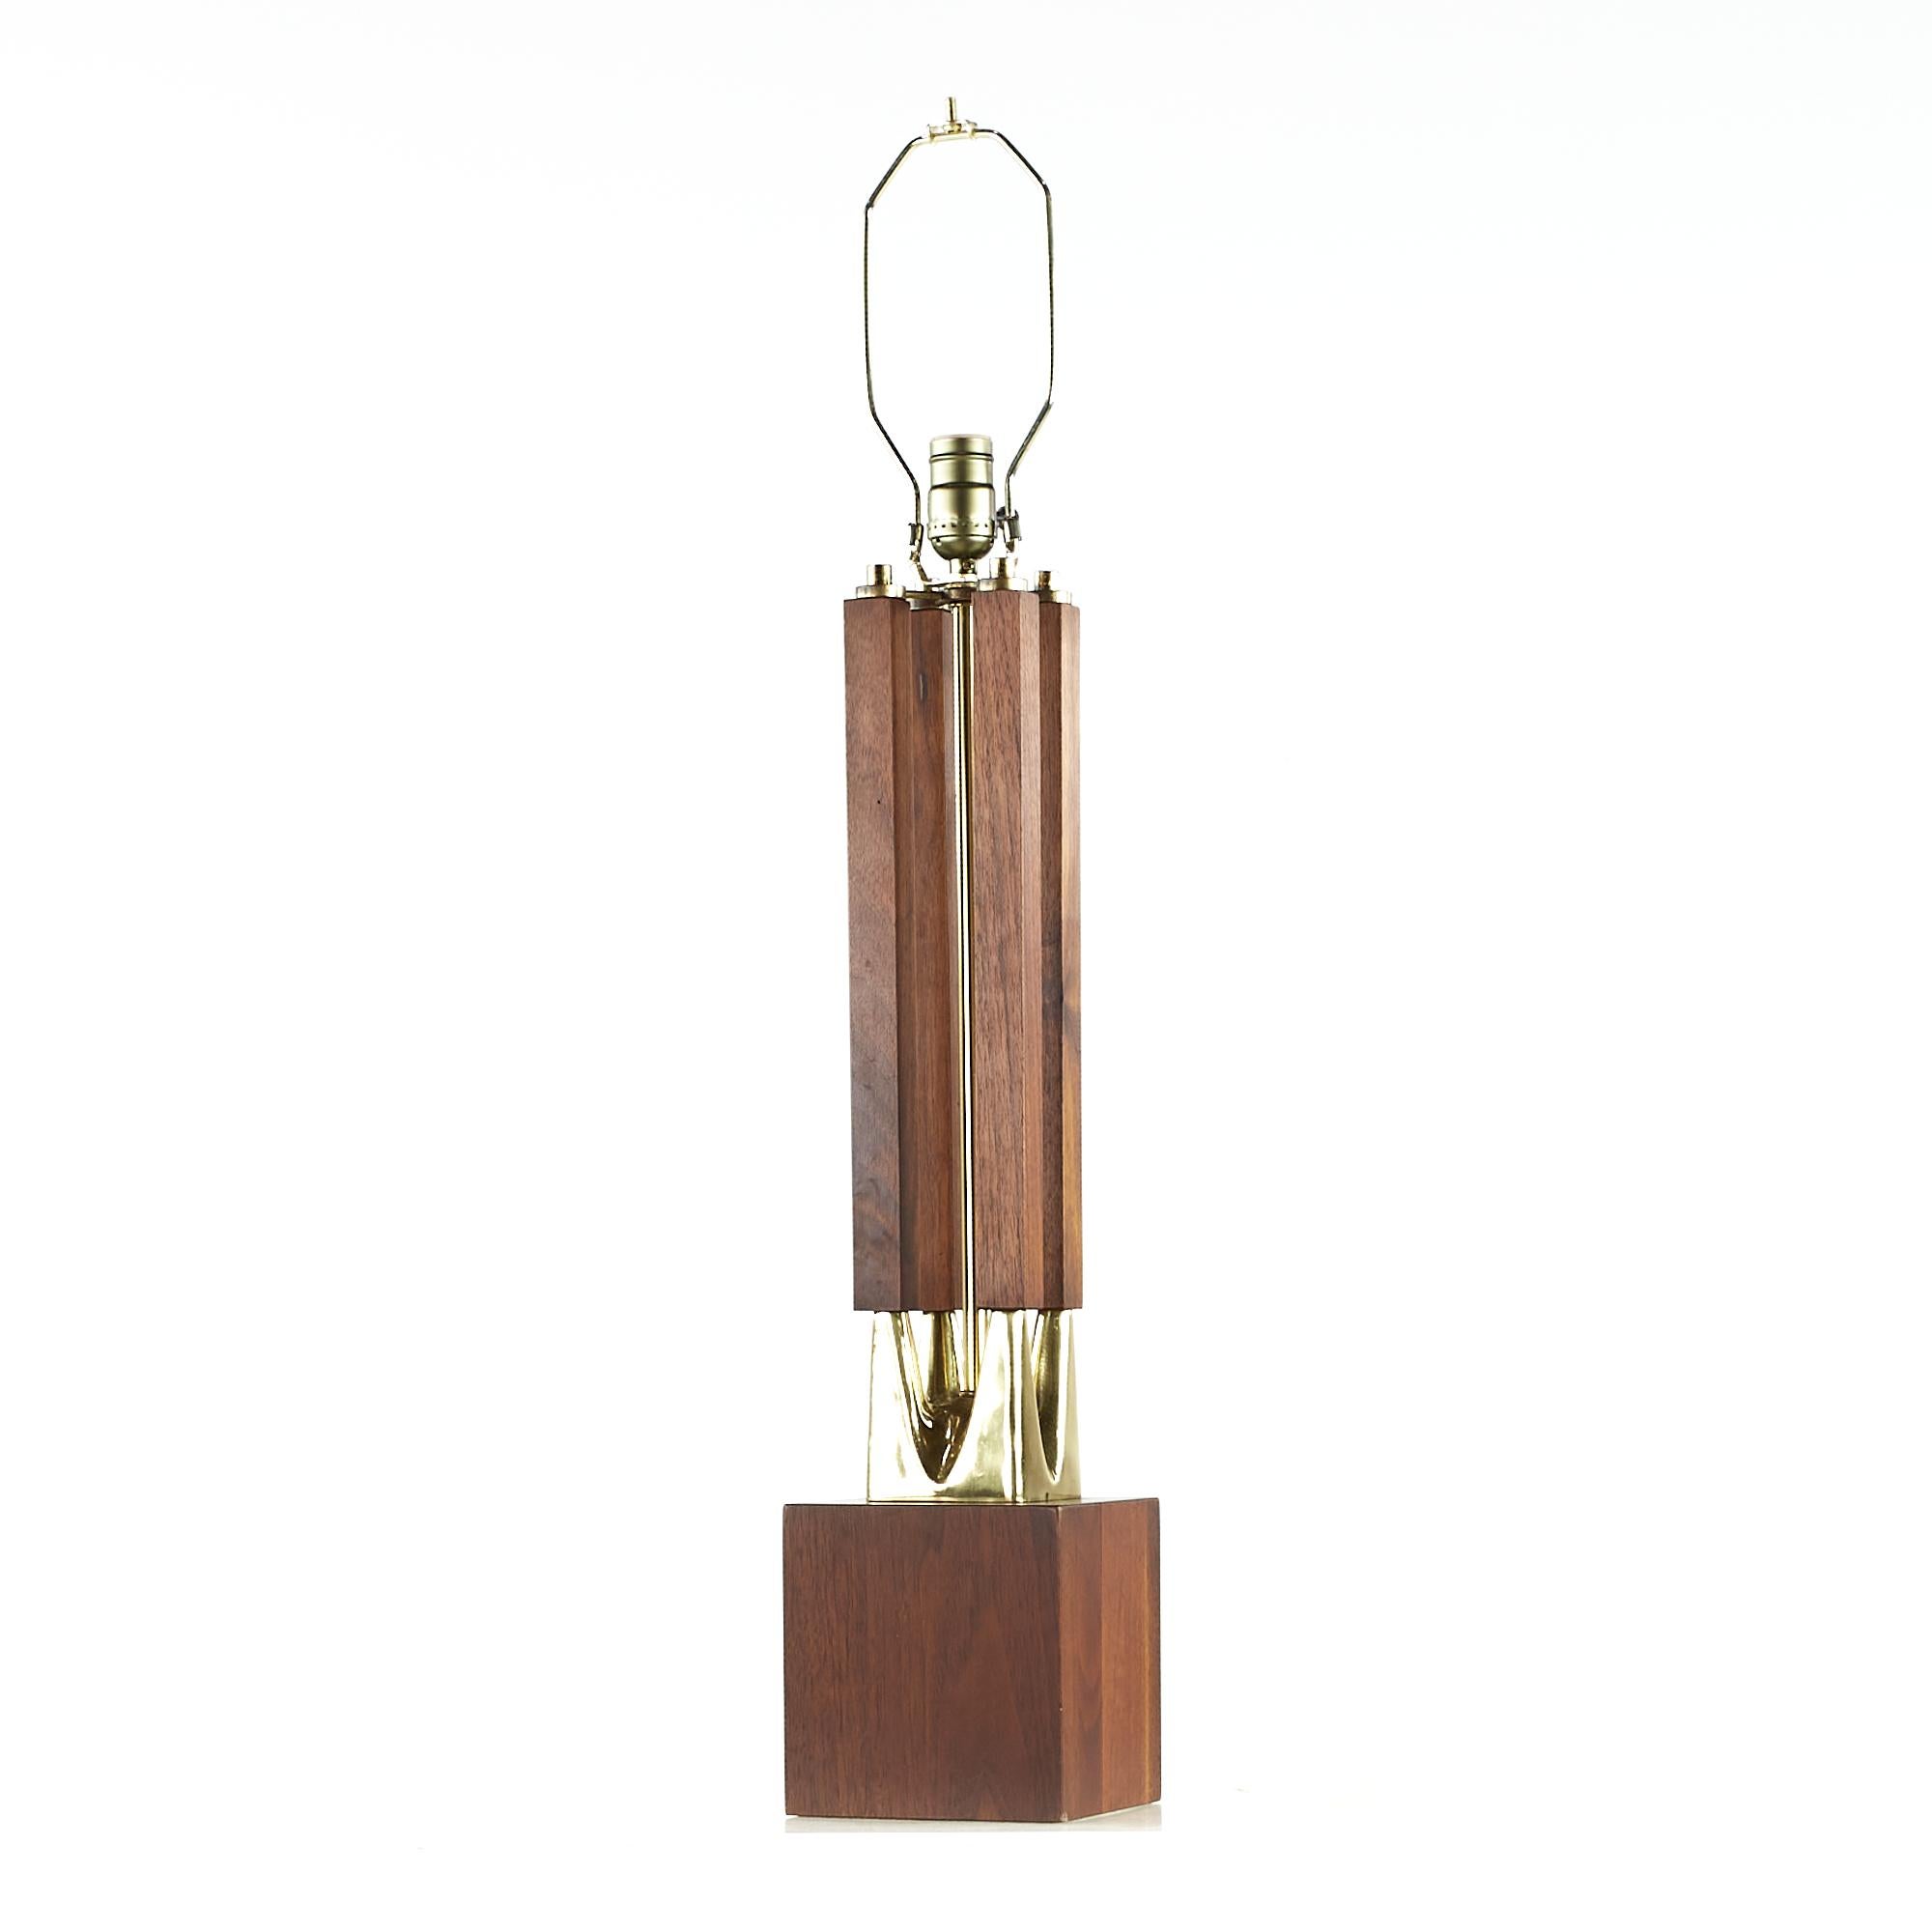 Late 20th Century Laurel Midcentury Brass and Walnut Table Lamps, Pair For Sale